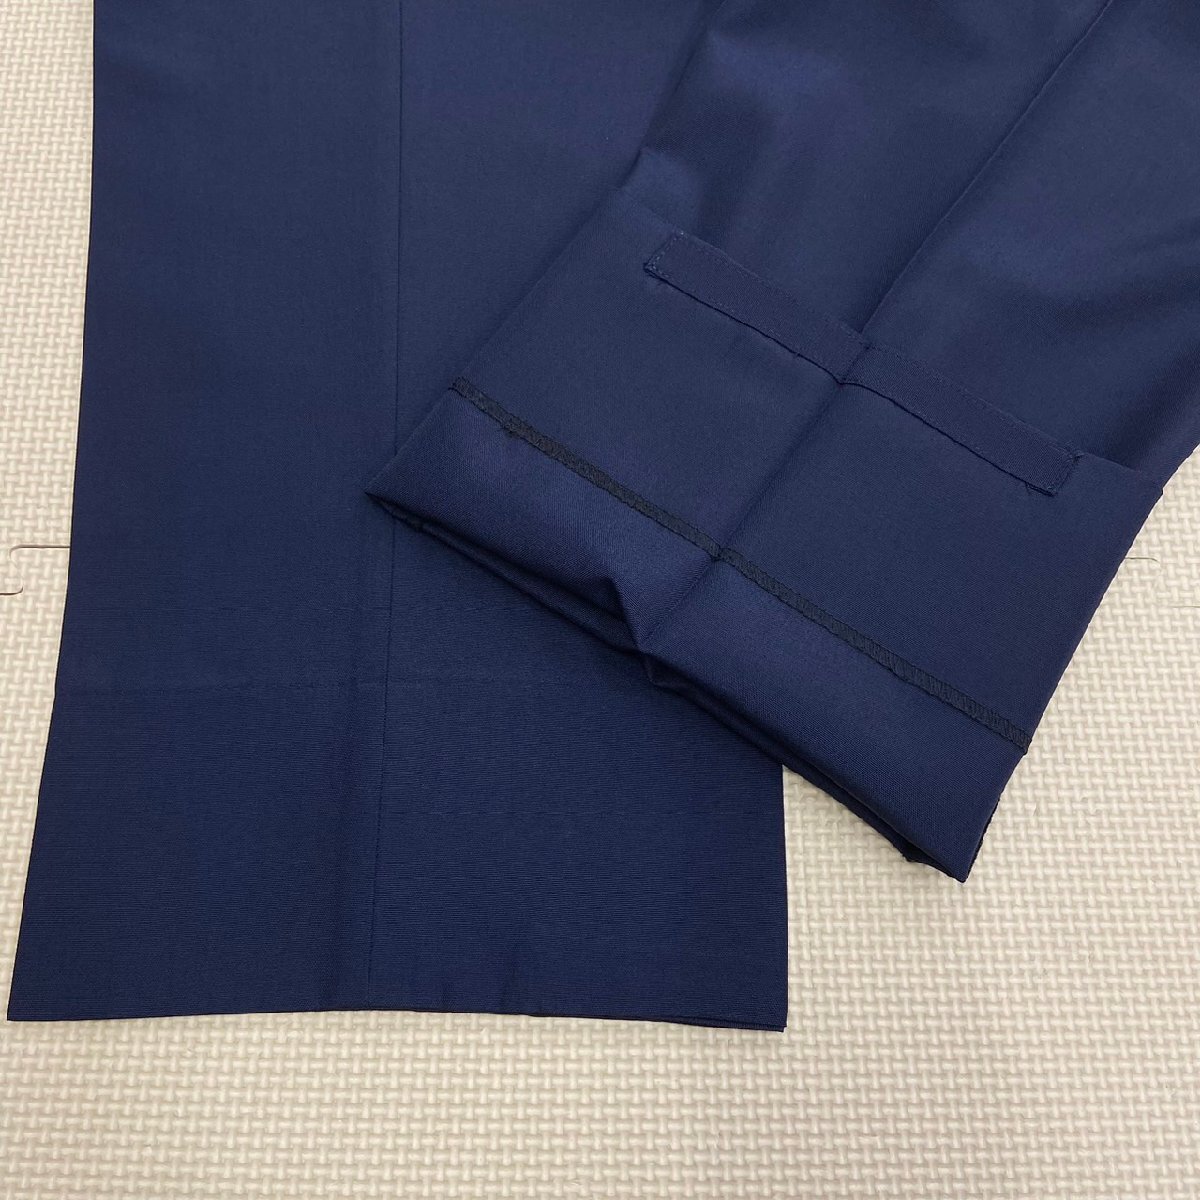 Y636/T1084 ( used ) Tochigi prefecture . north junior high school man . uniform 1 point / designation goods / summer trousers,W76, total length approximately 89, length of the legs approximately 64, navy blue, beautiful goods /GREEN MATE/ short period put on supplies 